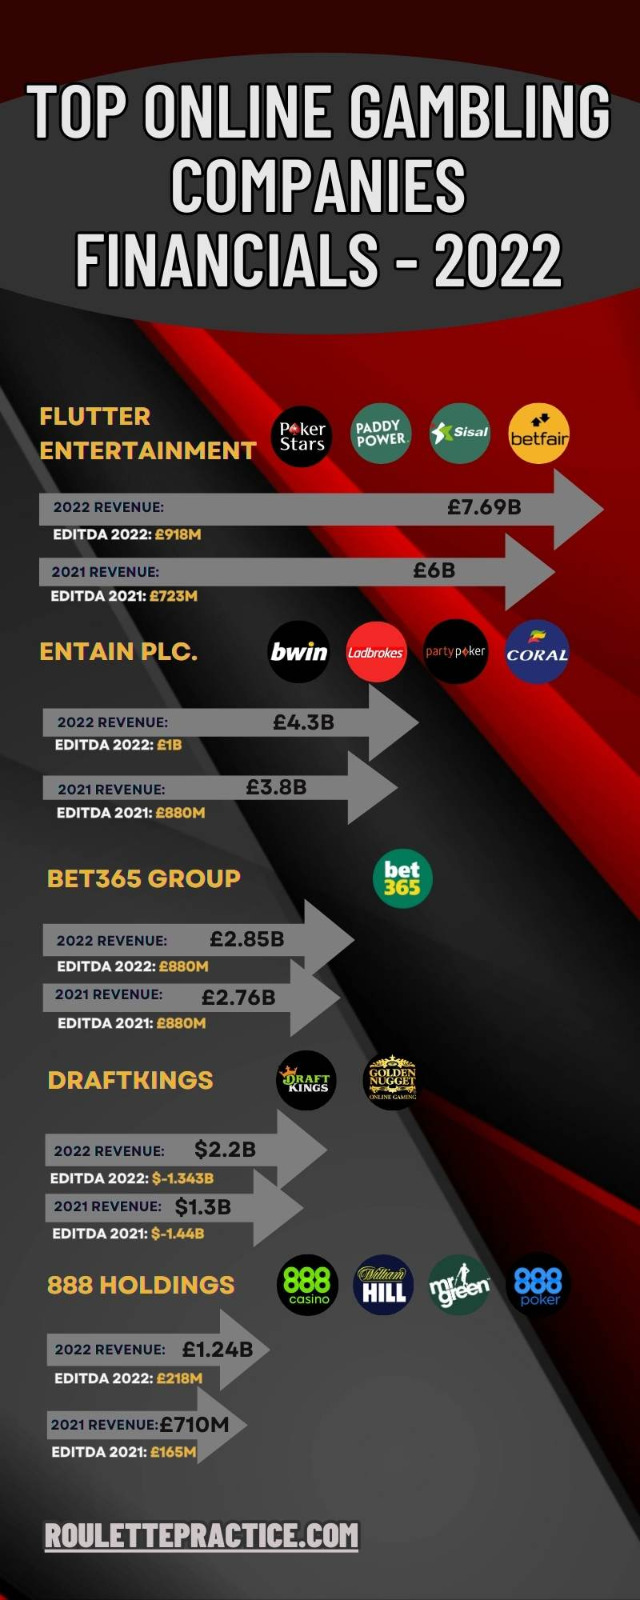 infographic top online gambling companies financial performance 2022